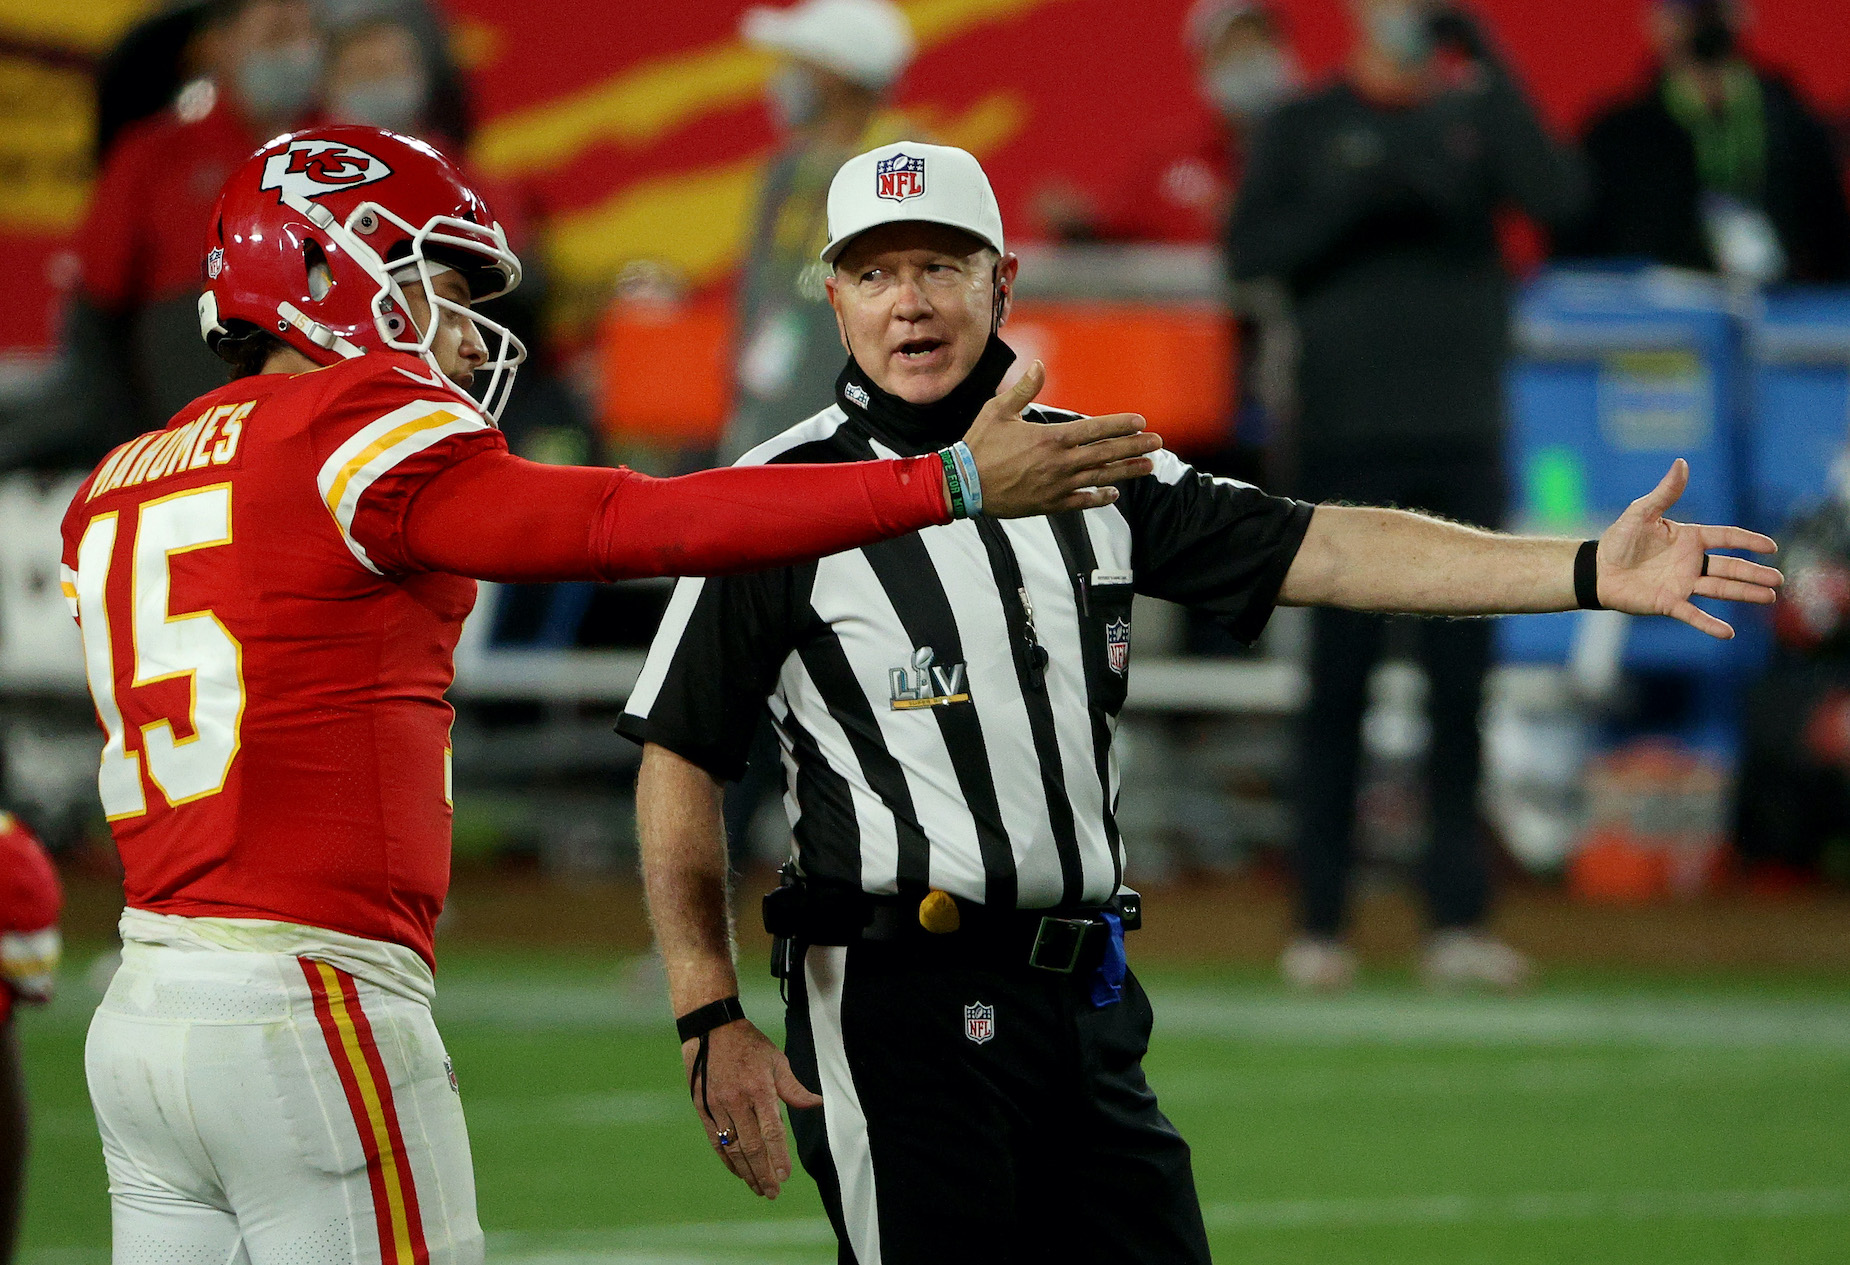 Kansas City Chiefs fans will feel that the referees made some questionable calls in Super Bowl 55. An NFL rules analyst agrees.